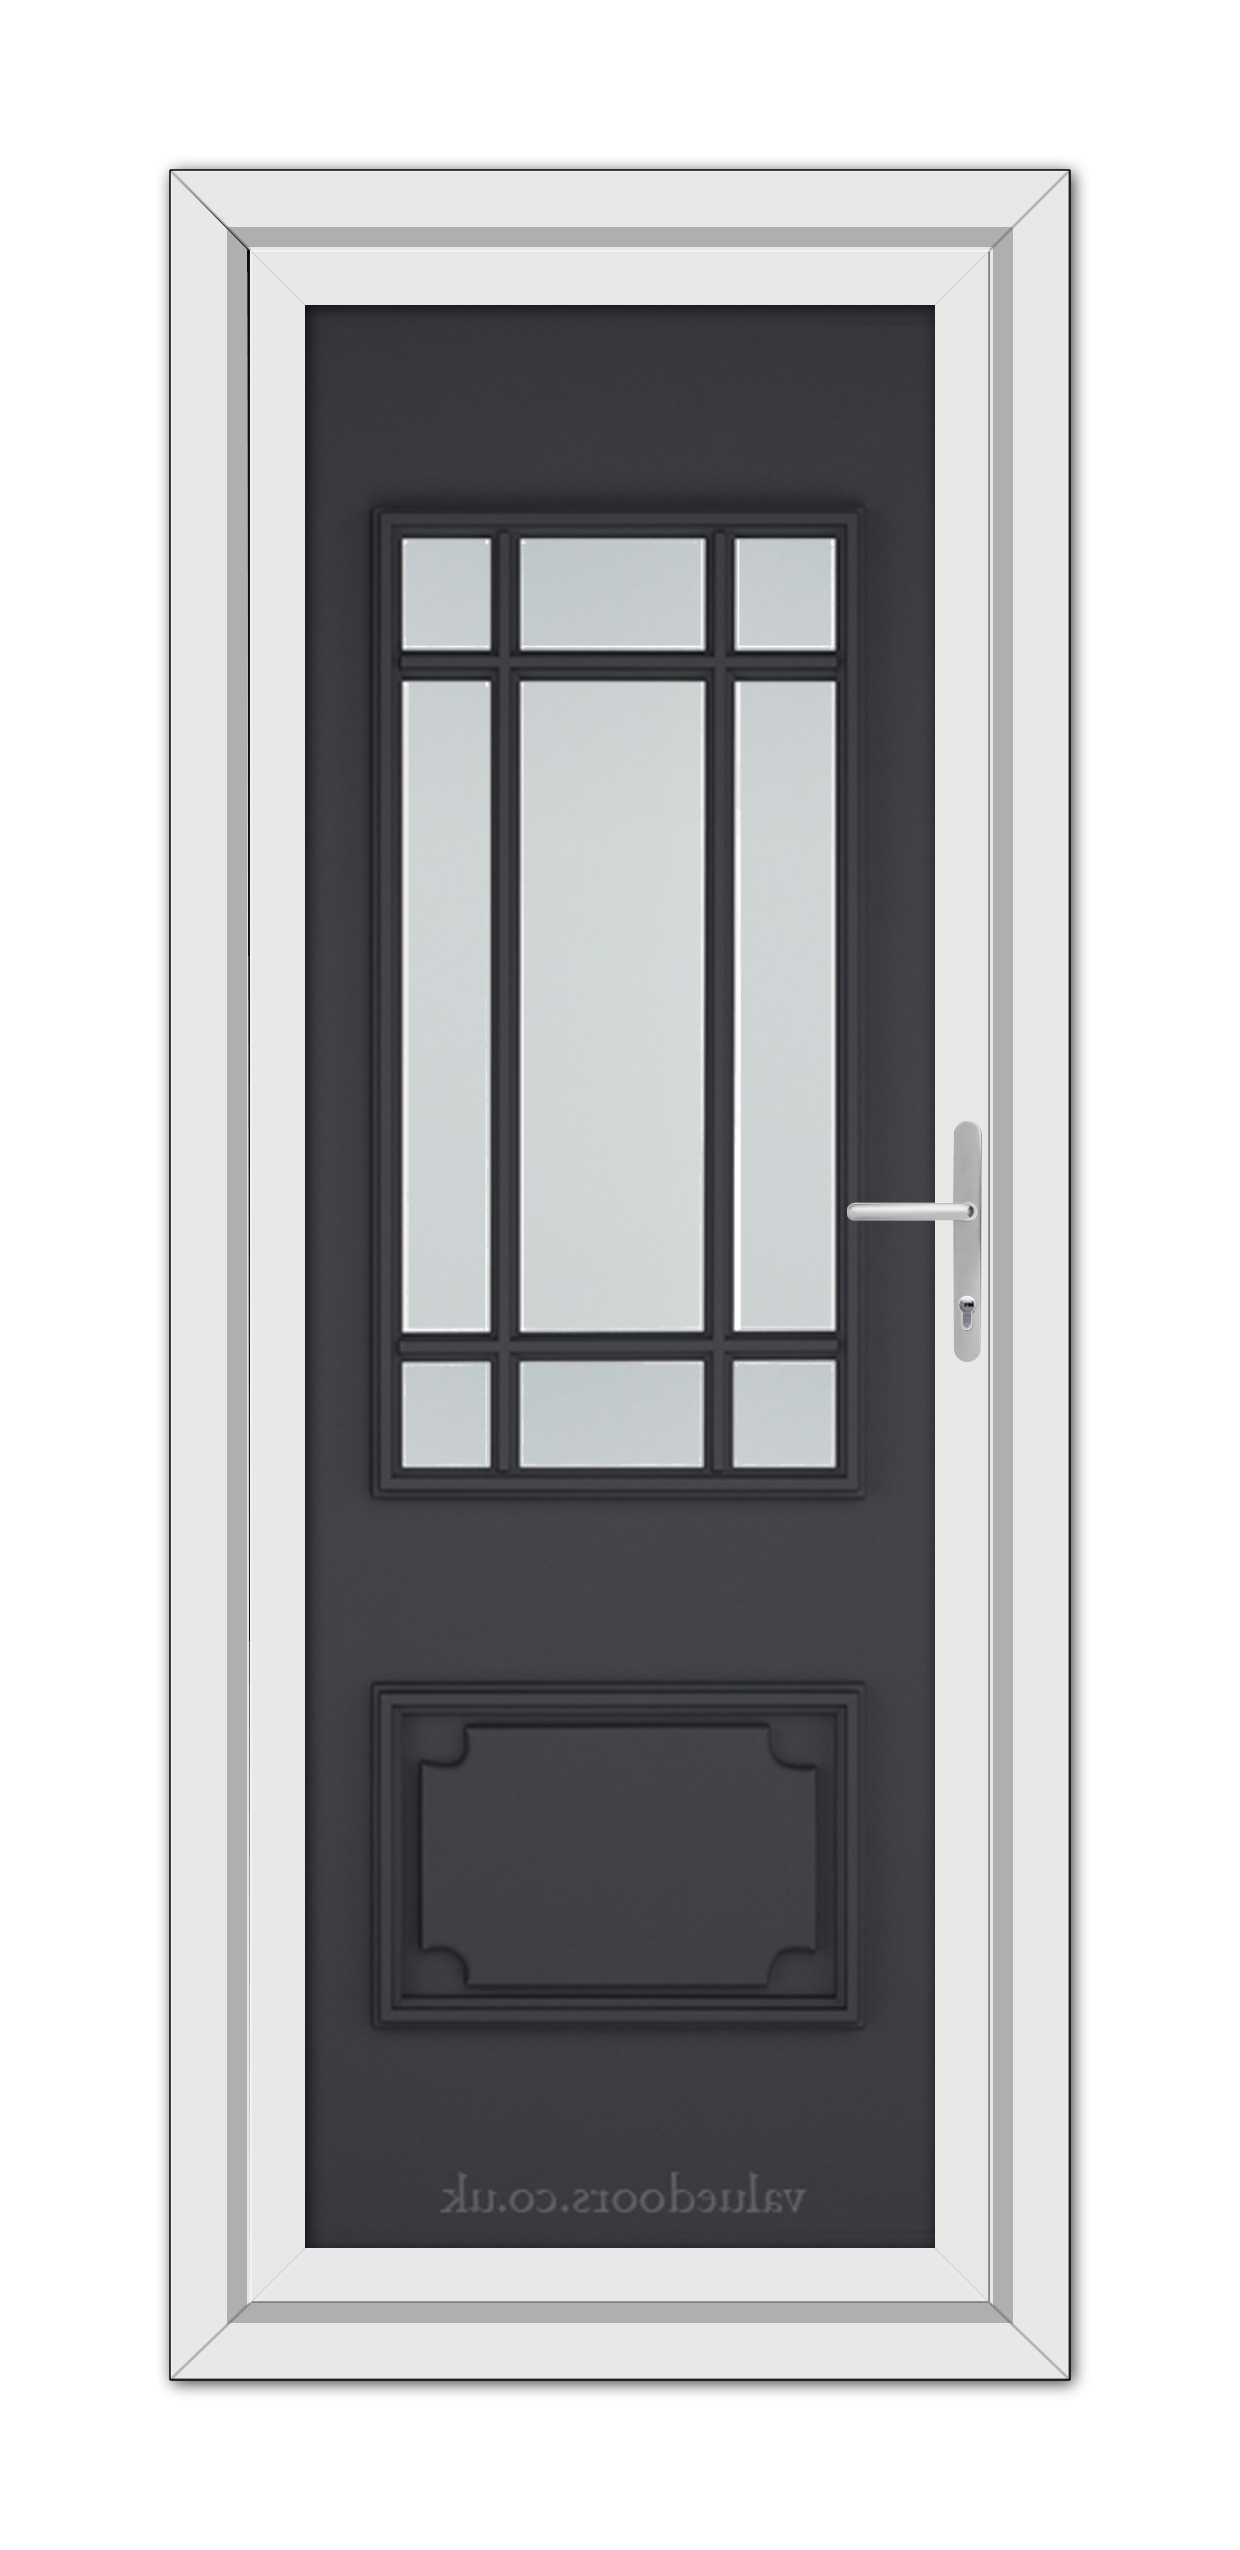 Grey Seville uPVC Door with a window featuring six clear glass panels and a white frame, equipped with a metal handle on the right side.